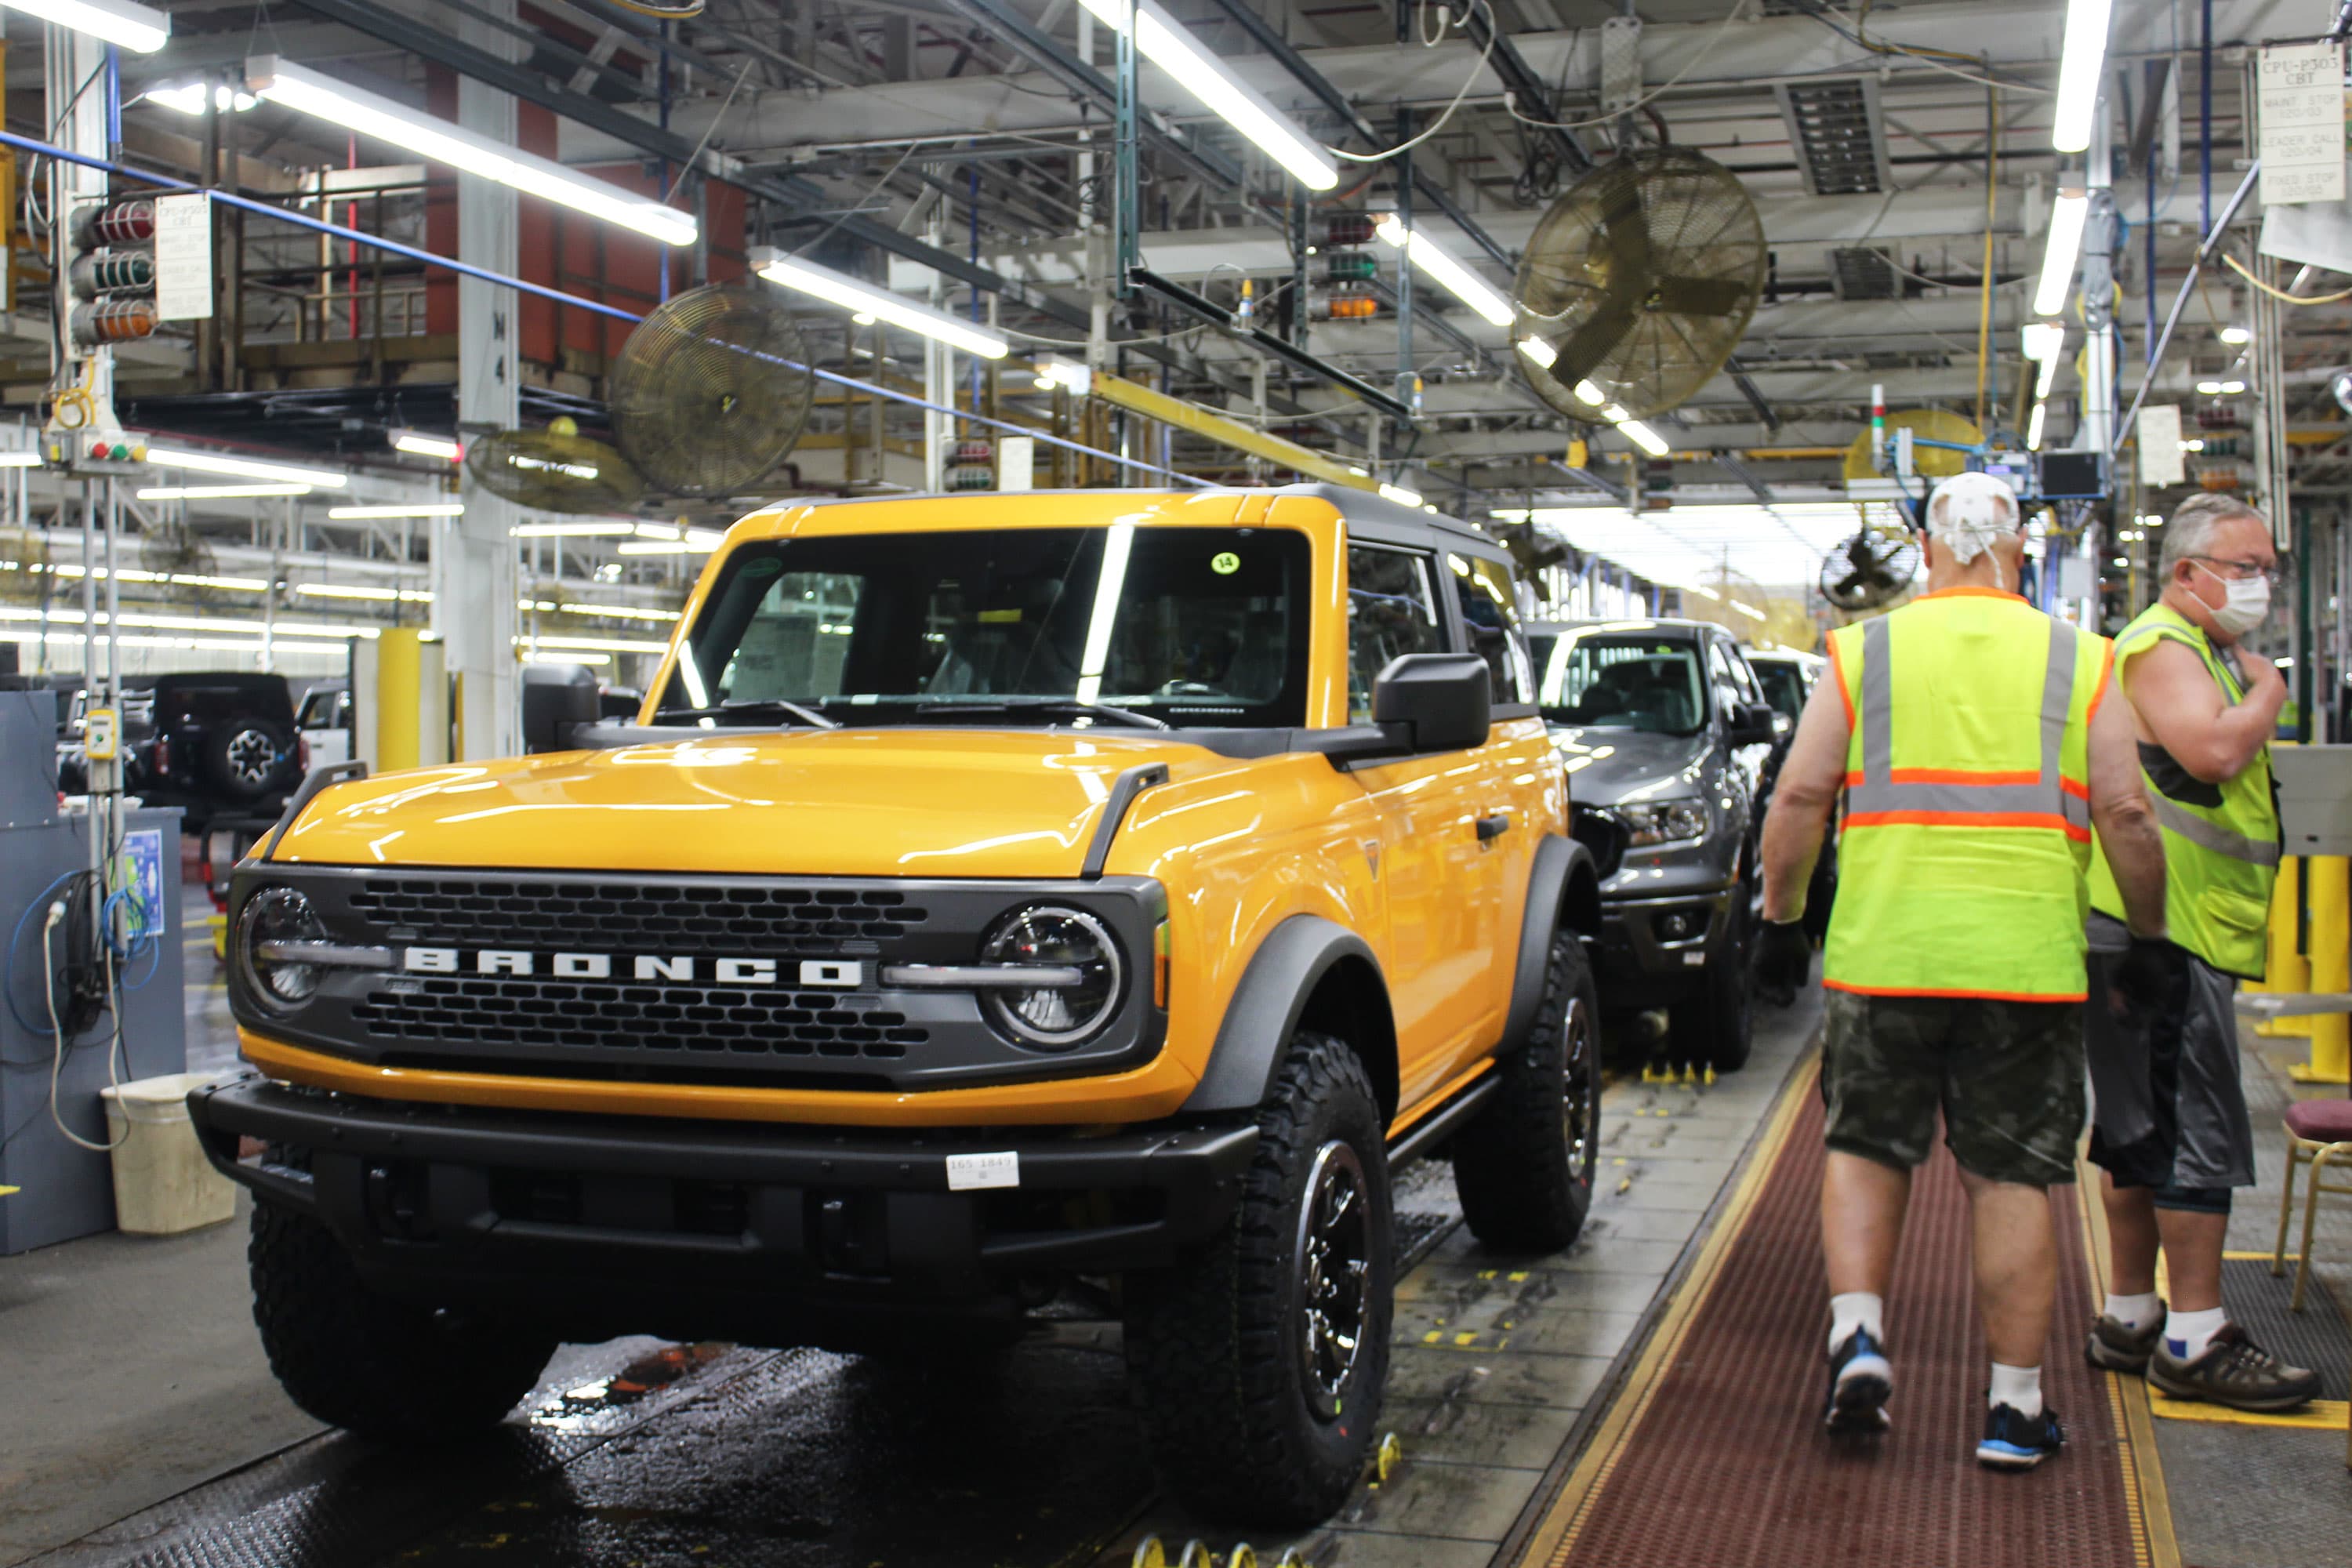 Production snags cause Ford to delay deliveries of Ford Bronco SUV and Mustang Mach-E